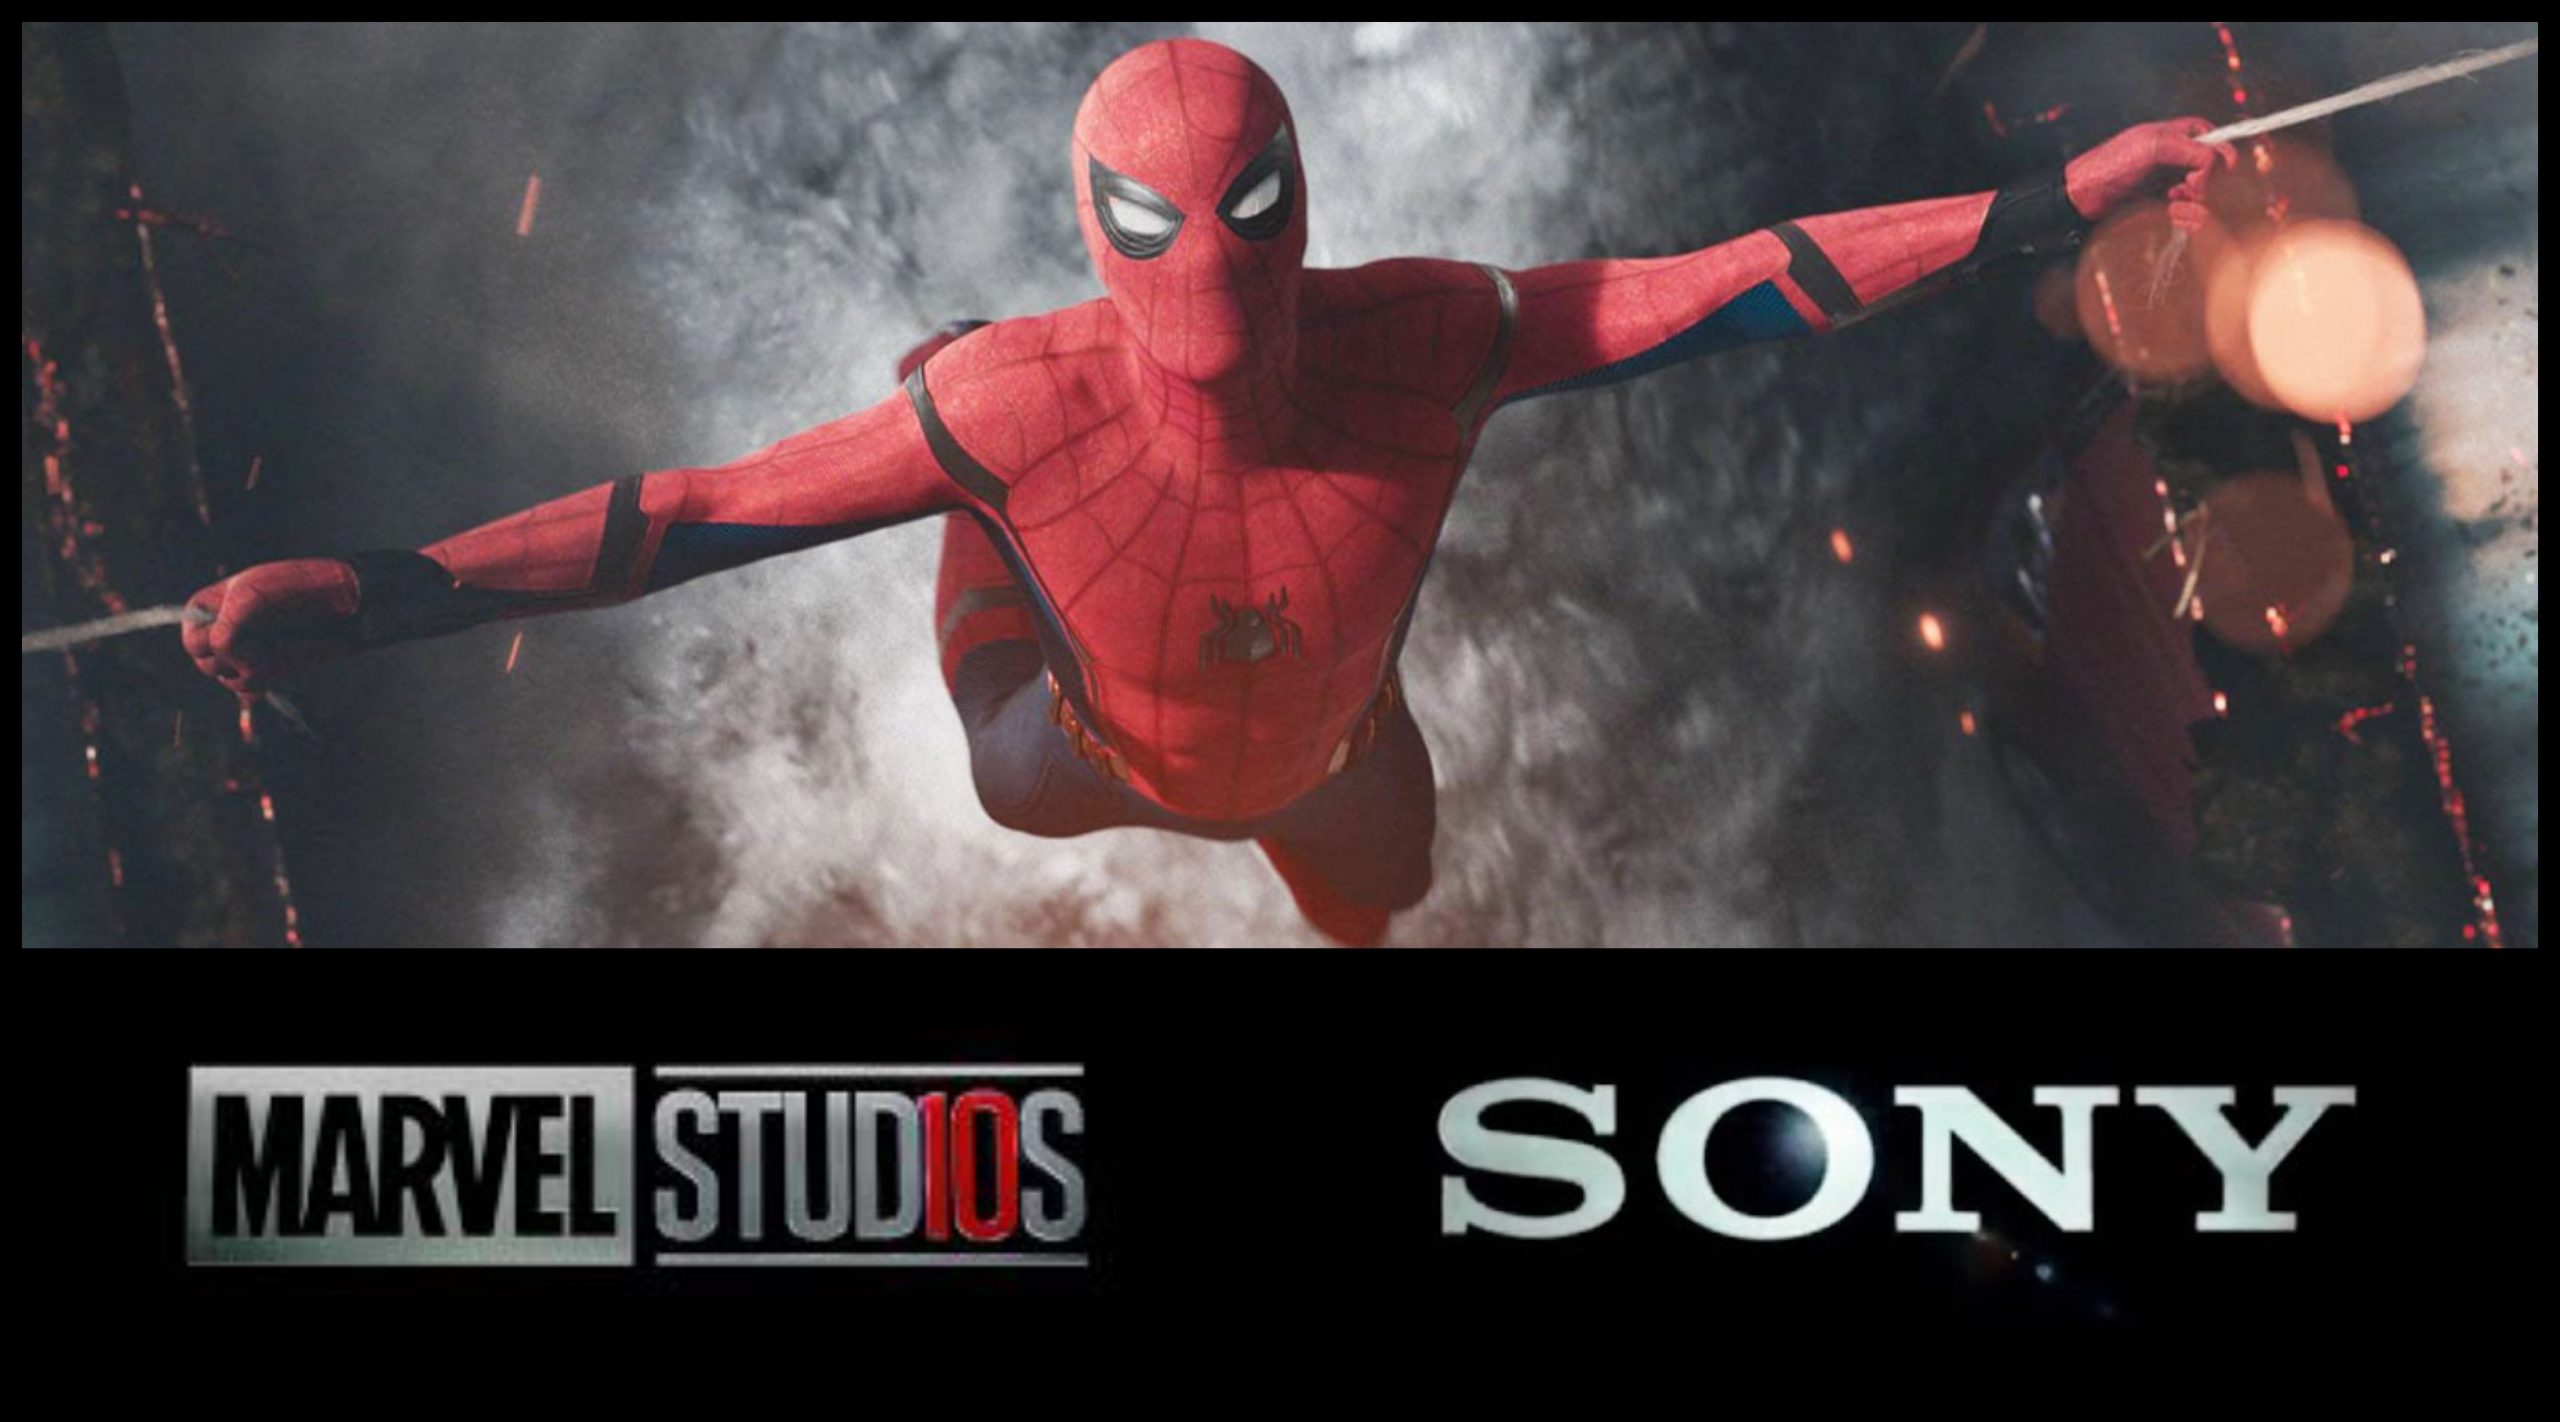 Rumored: Marvel Studios and Sony Have Reached a New ‘Spider-Man’ Deal